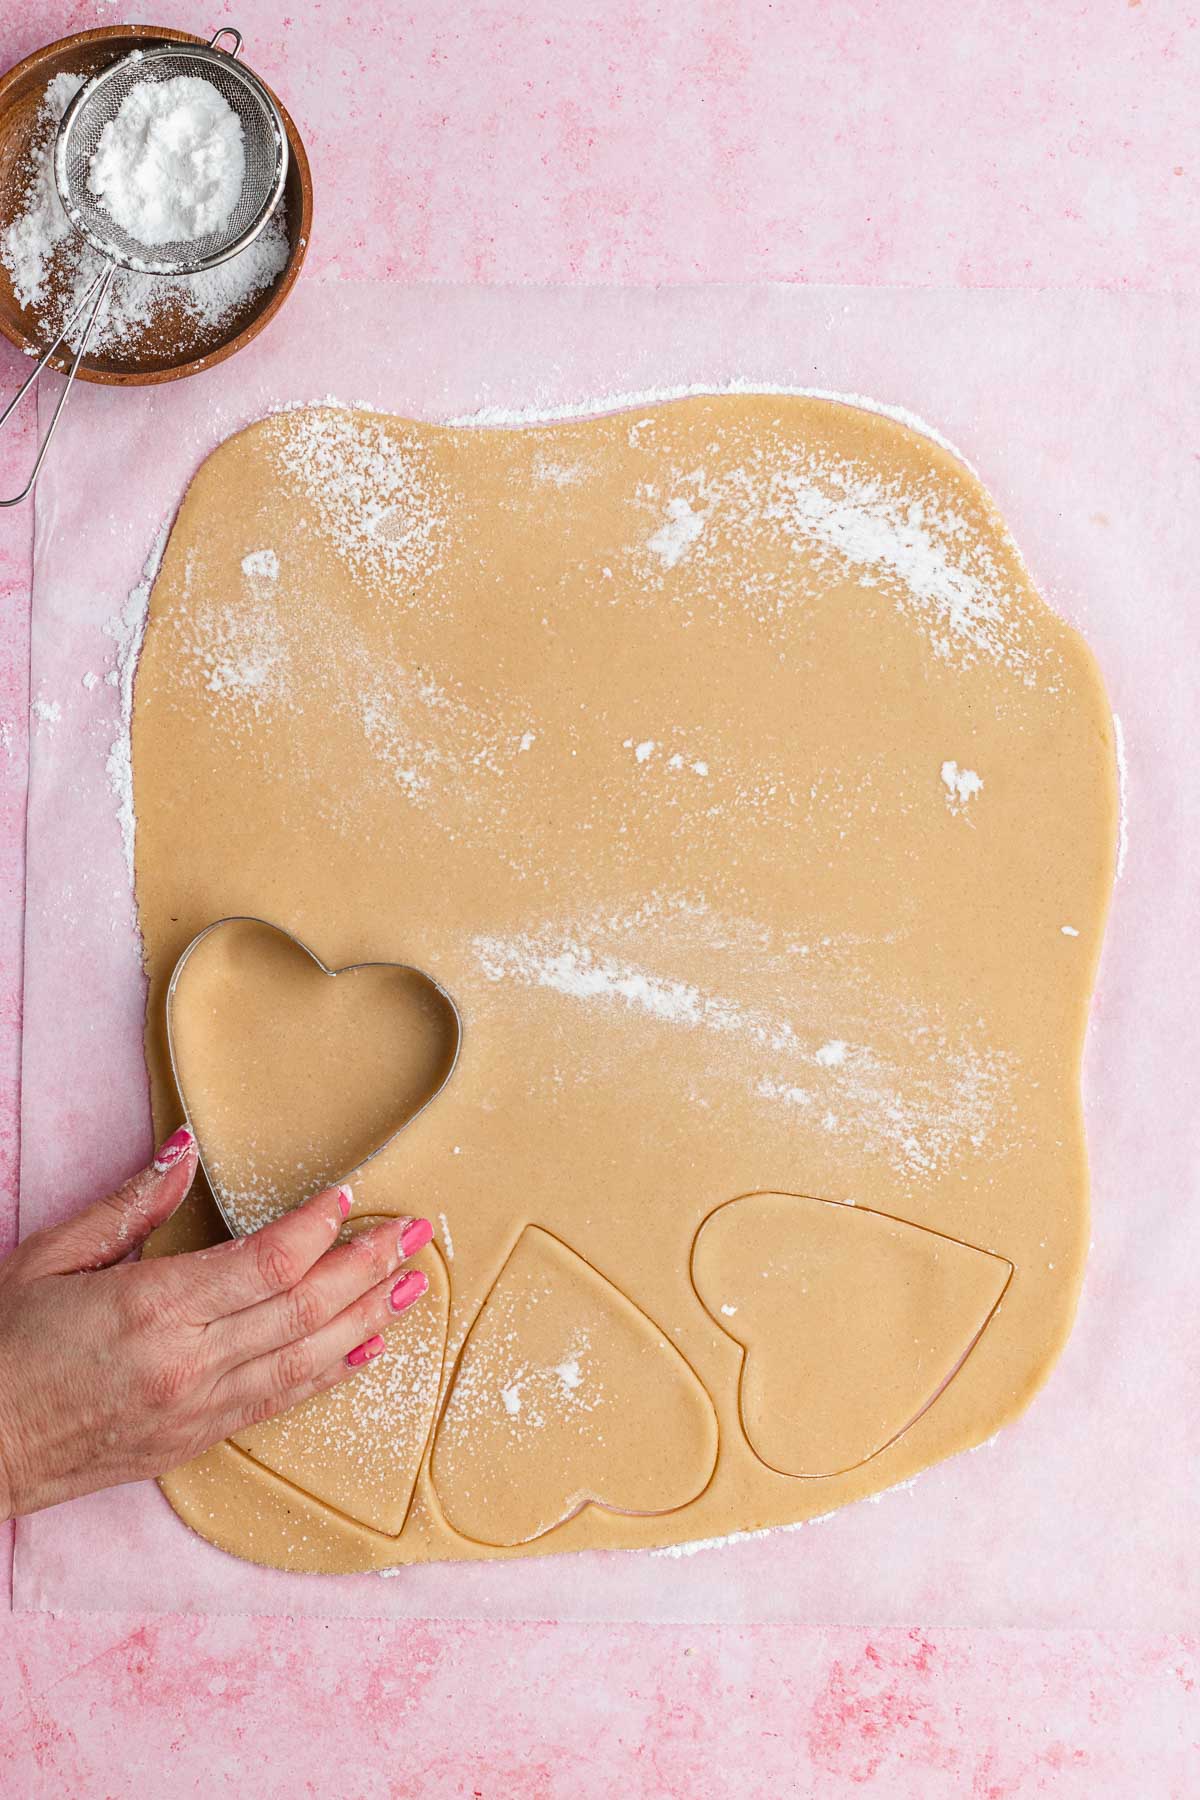 cutting shapes into flattened dough with heart shaped cutter